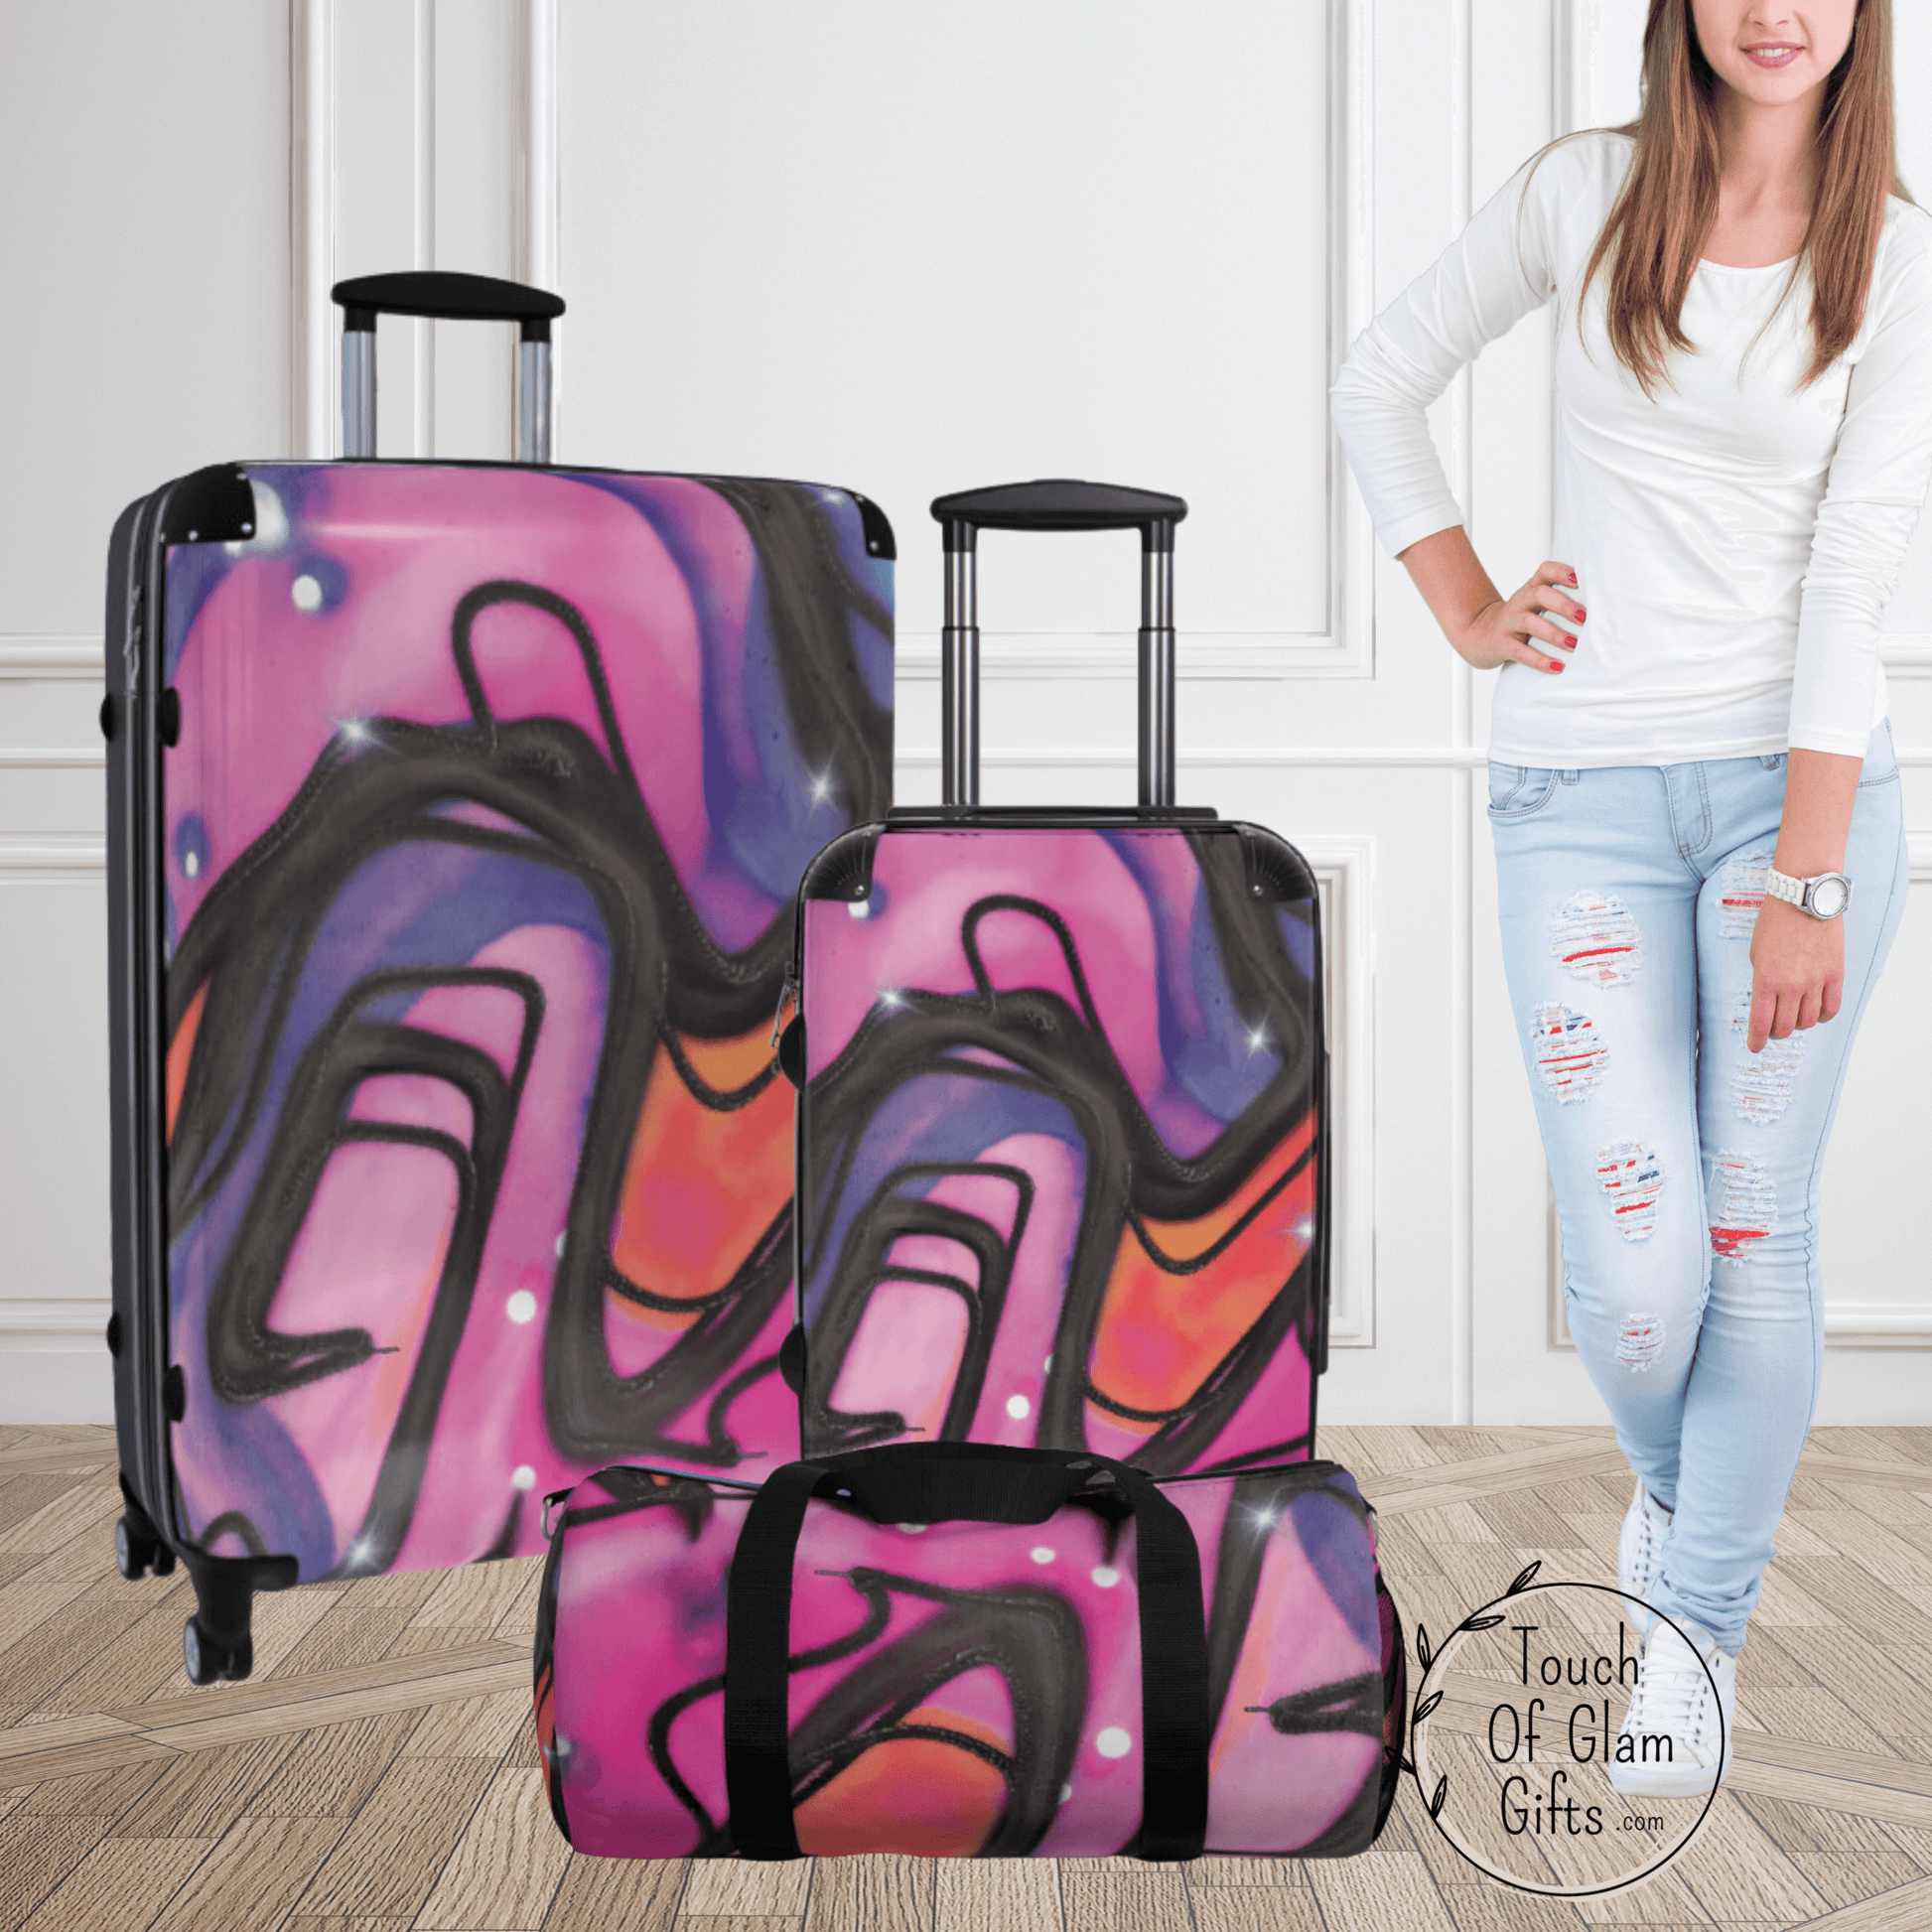 Our pink travel gear for teens is the perfect gift for teen girls and young adults. This pink retro matching set comes in luggage in three sizes and a duffel bag in two sizes.